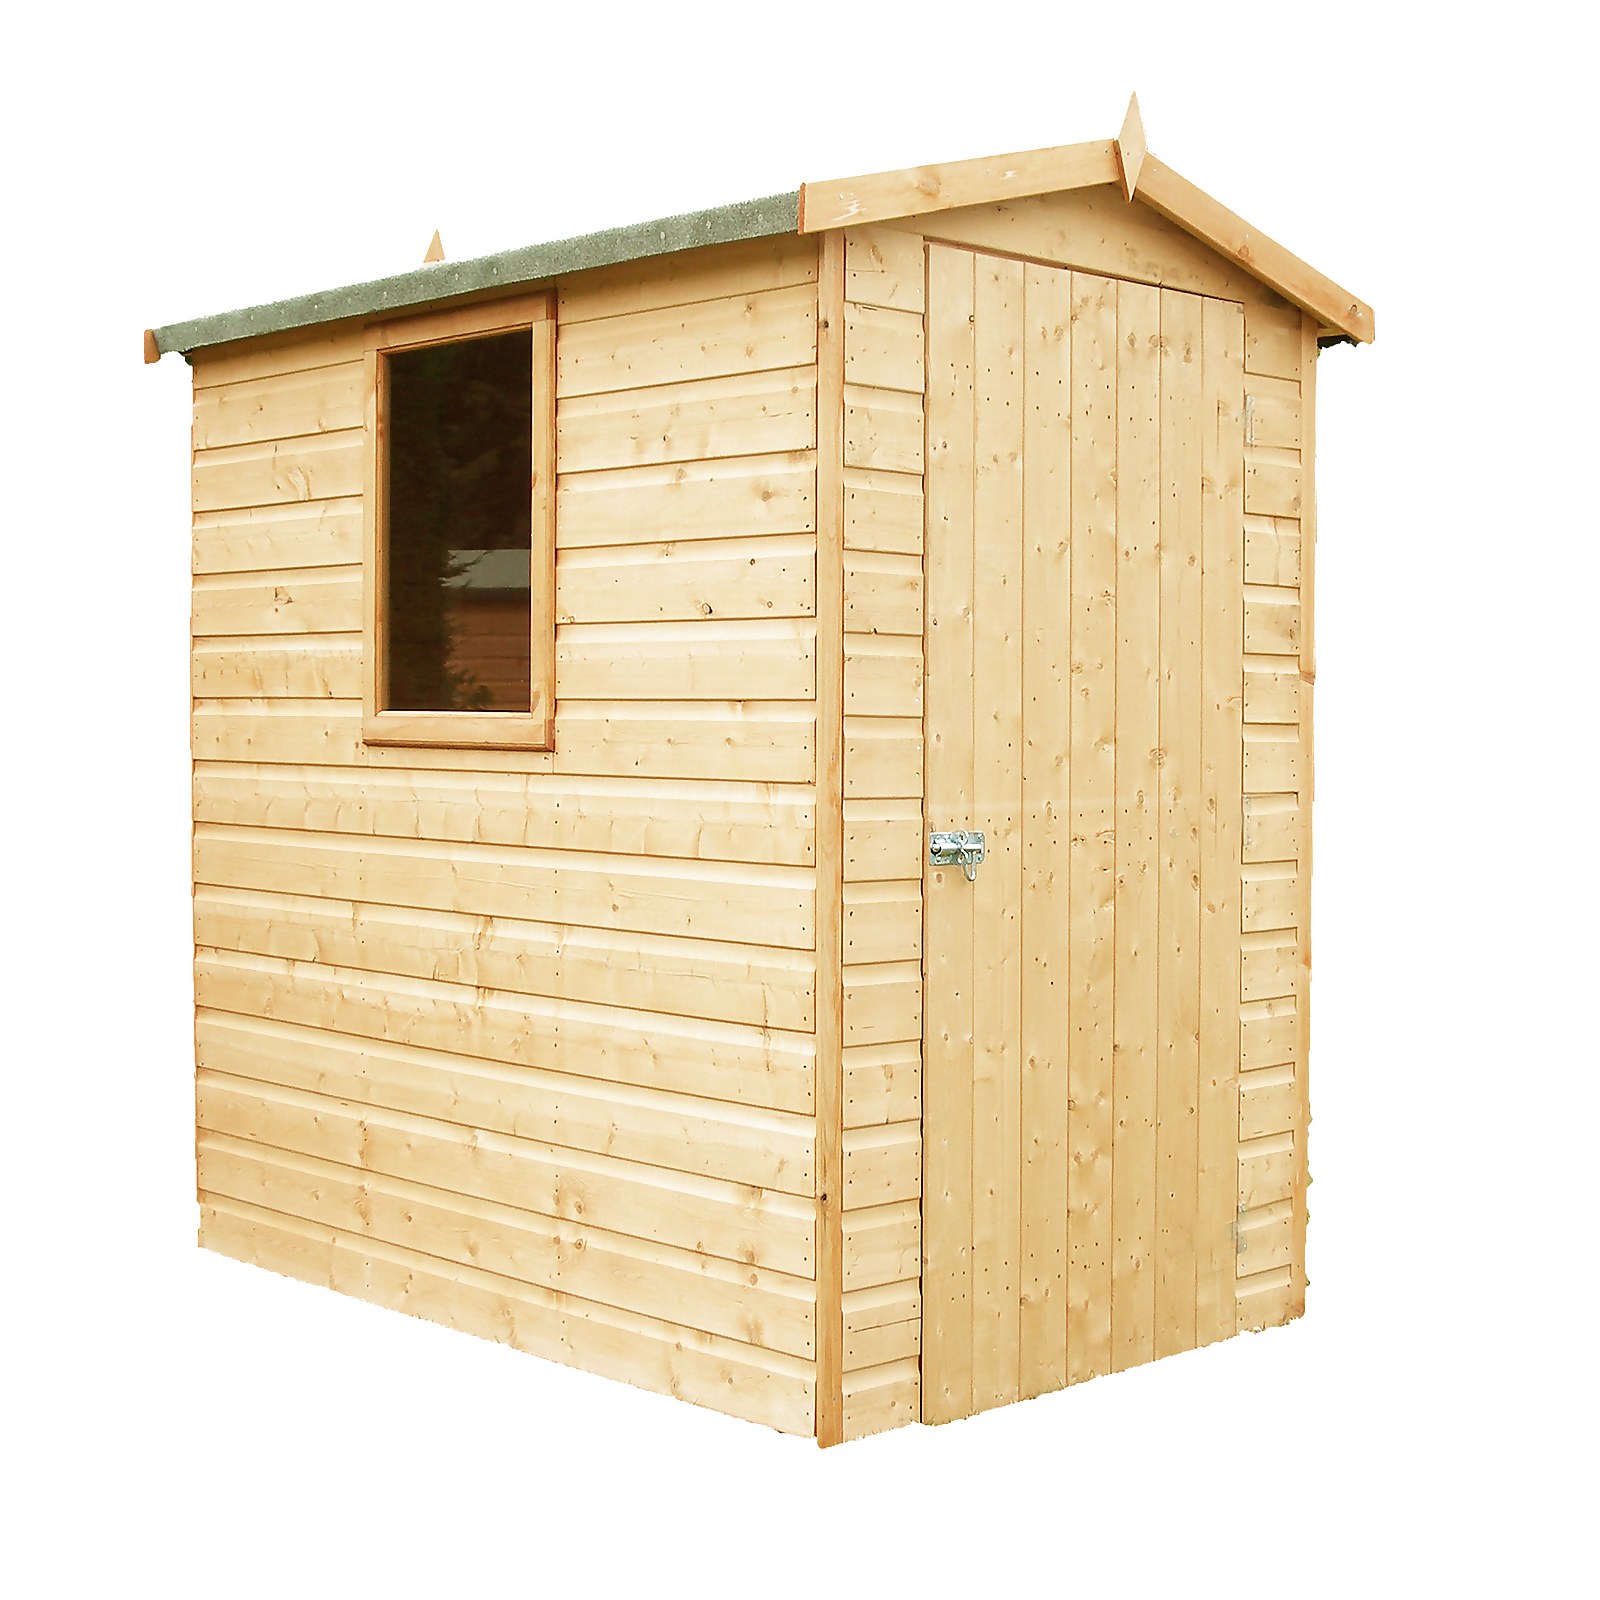 Shire 6 x 4ft Lewis Garden Shed